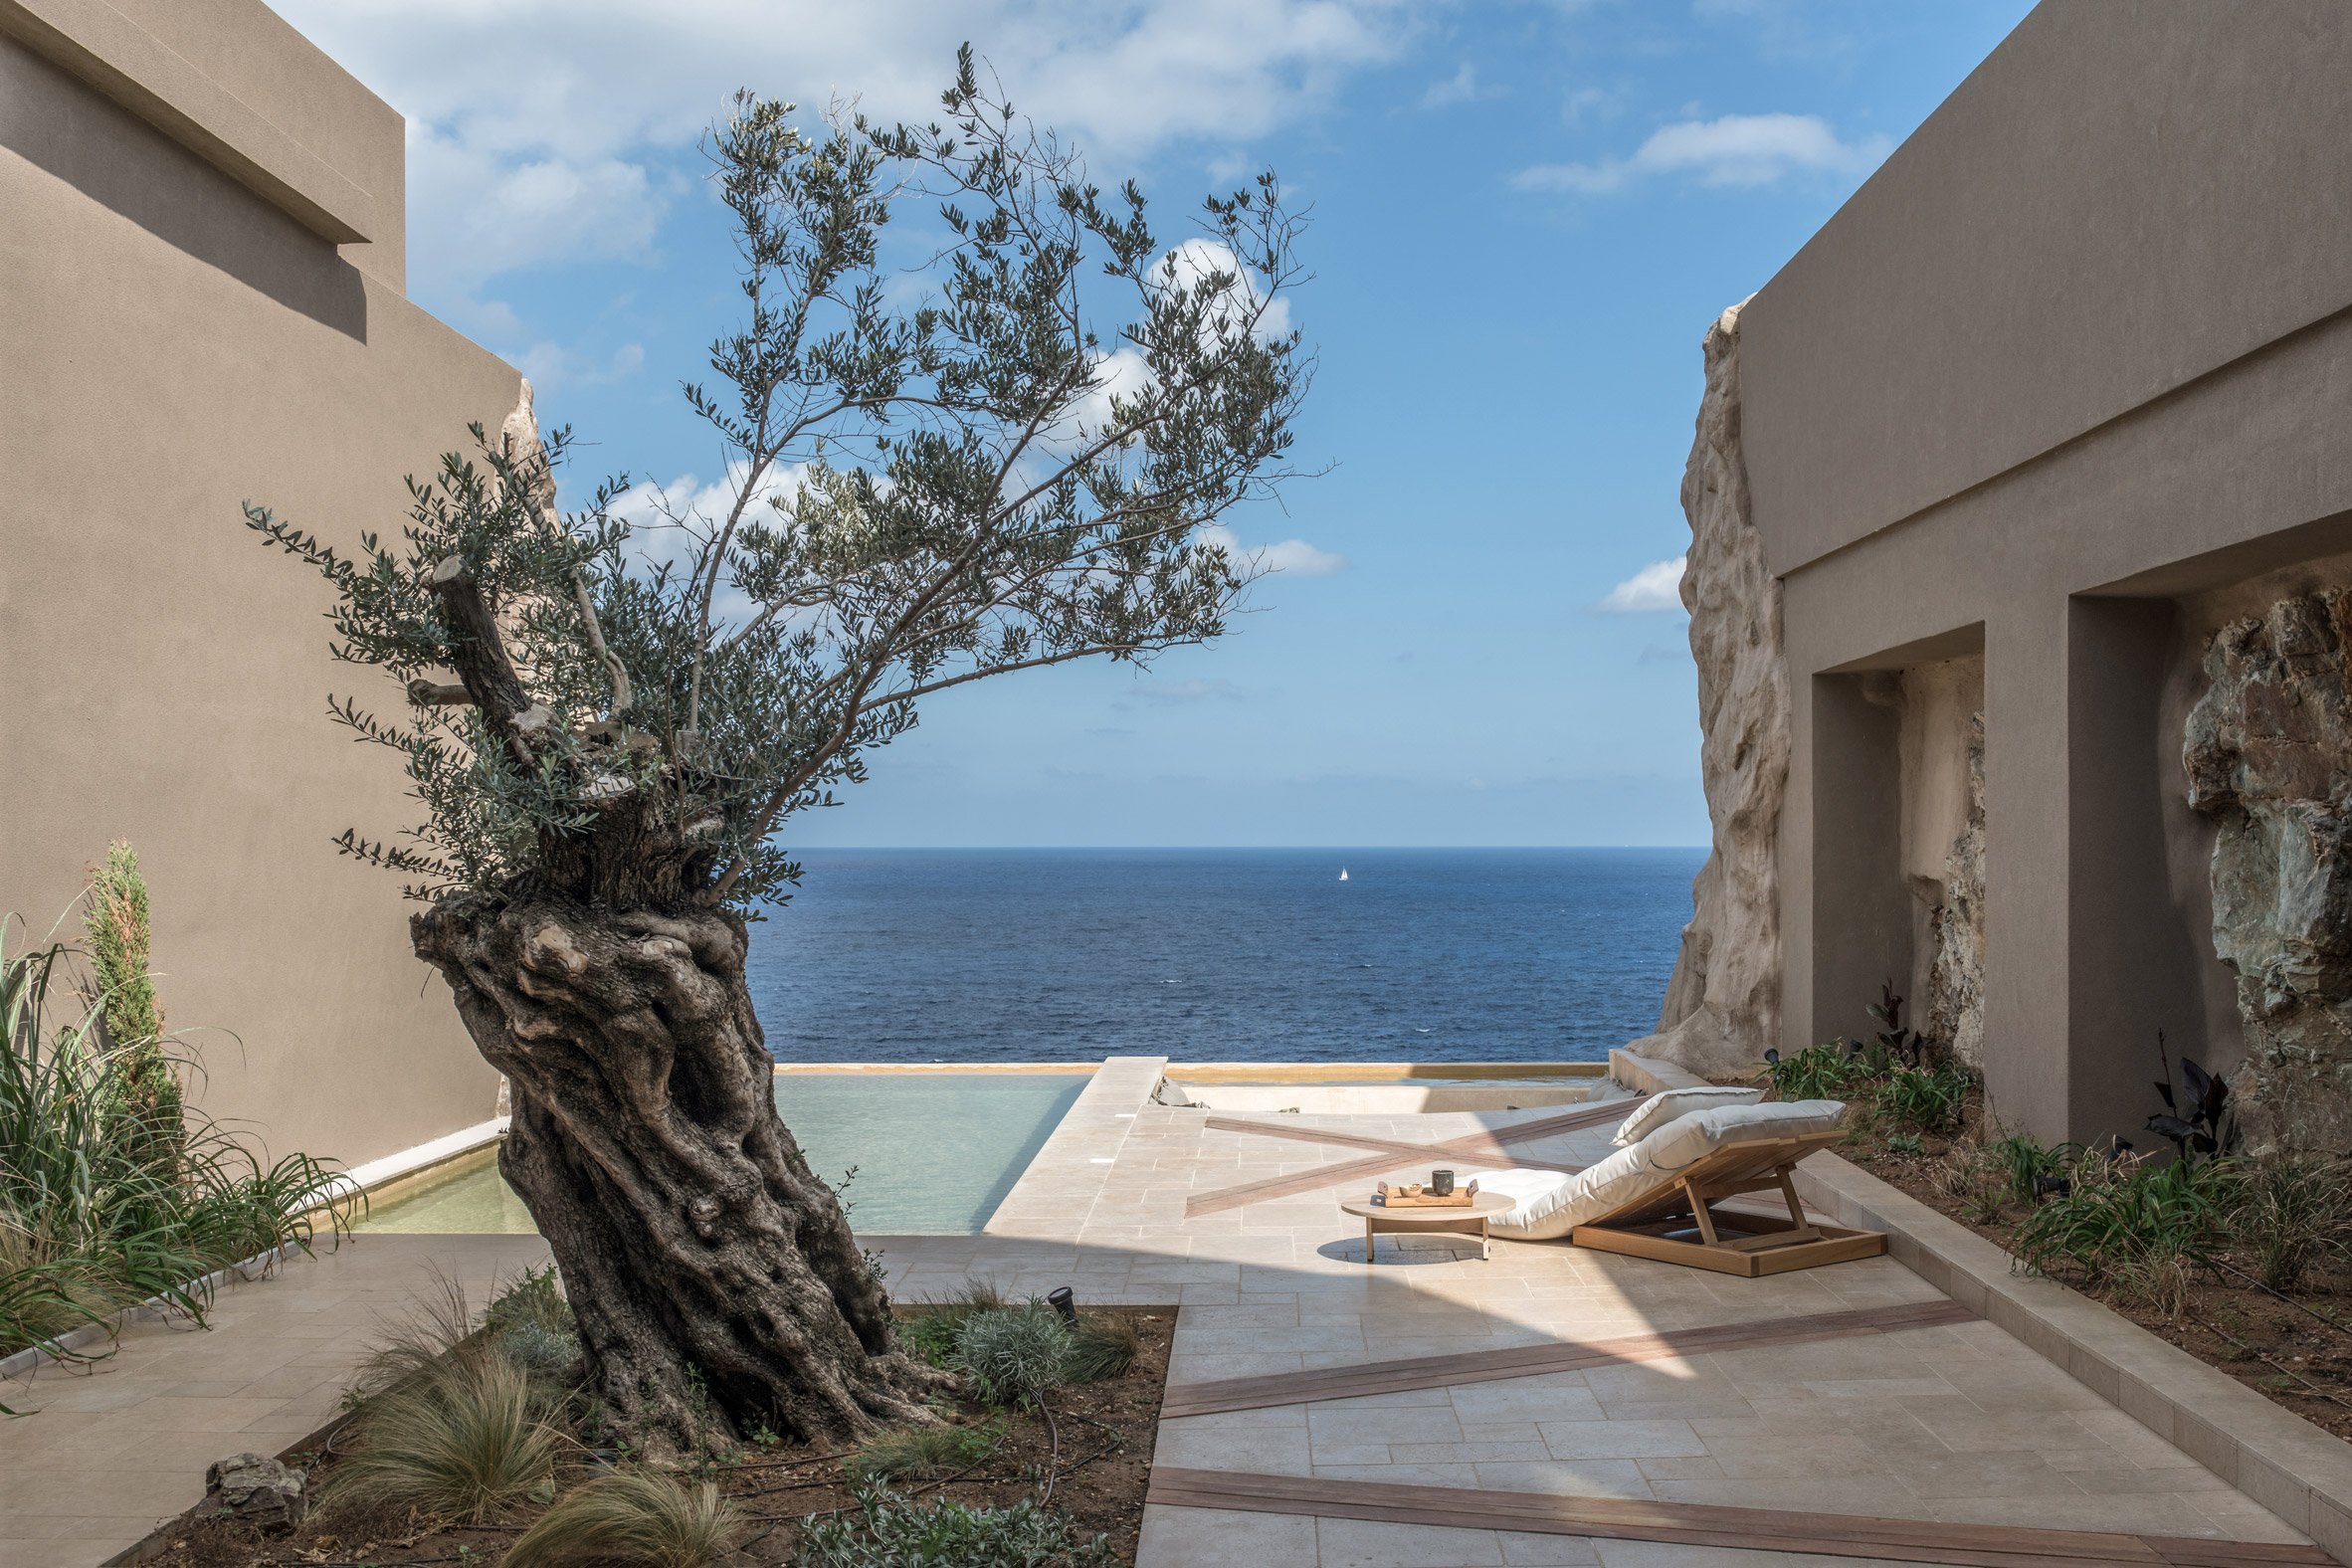 Arco Suites hotel on Crete by Danae and Konstantina Orfanake